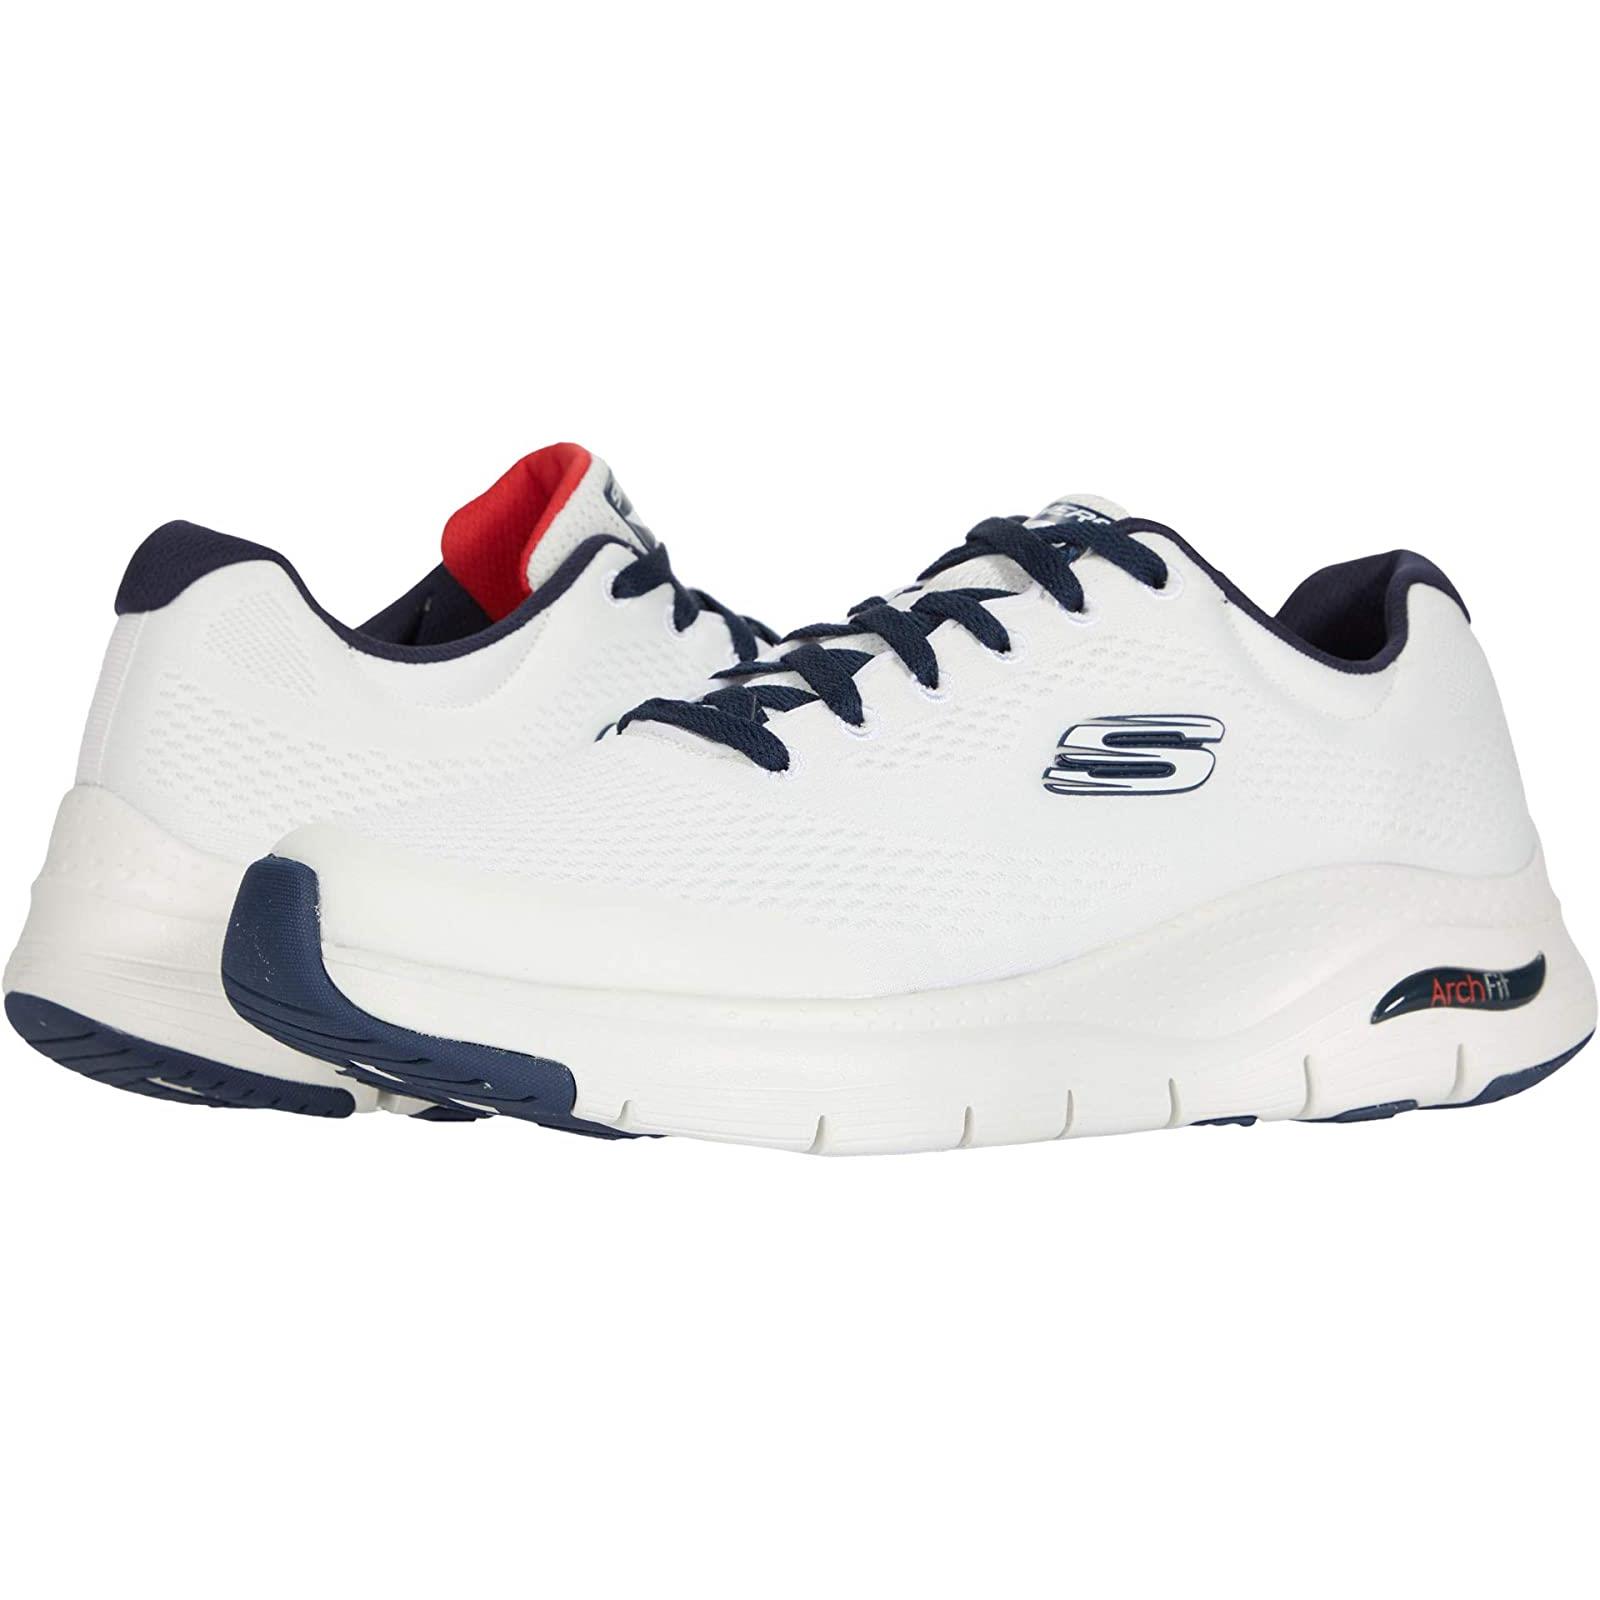 Man`s Sneakers Athletic Shoes Skechers Arch Fit White/Navy